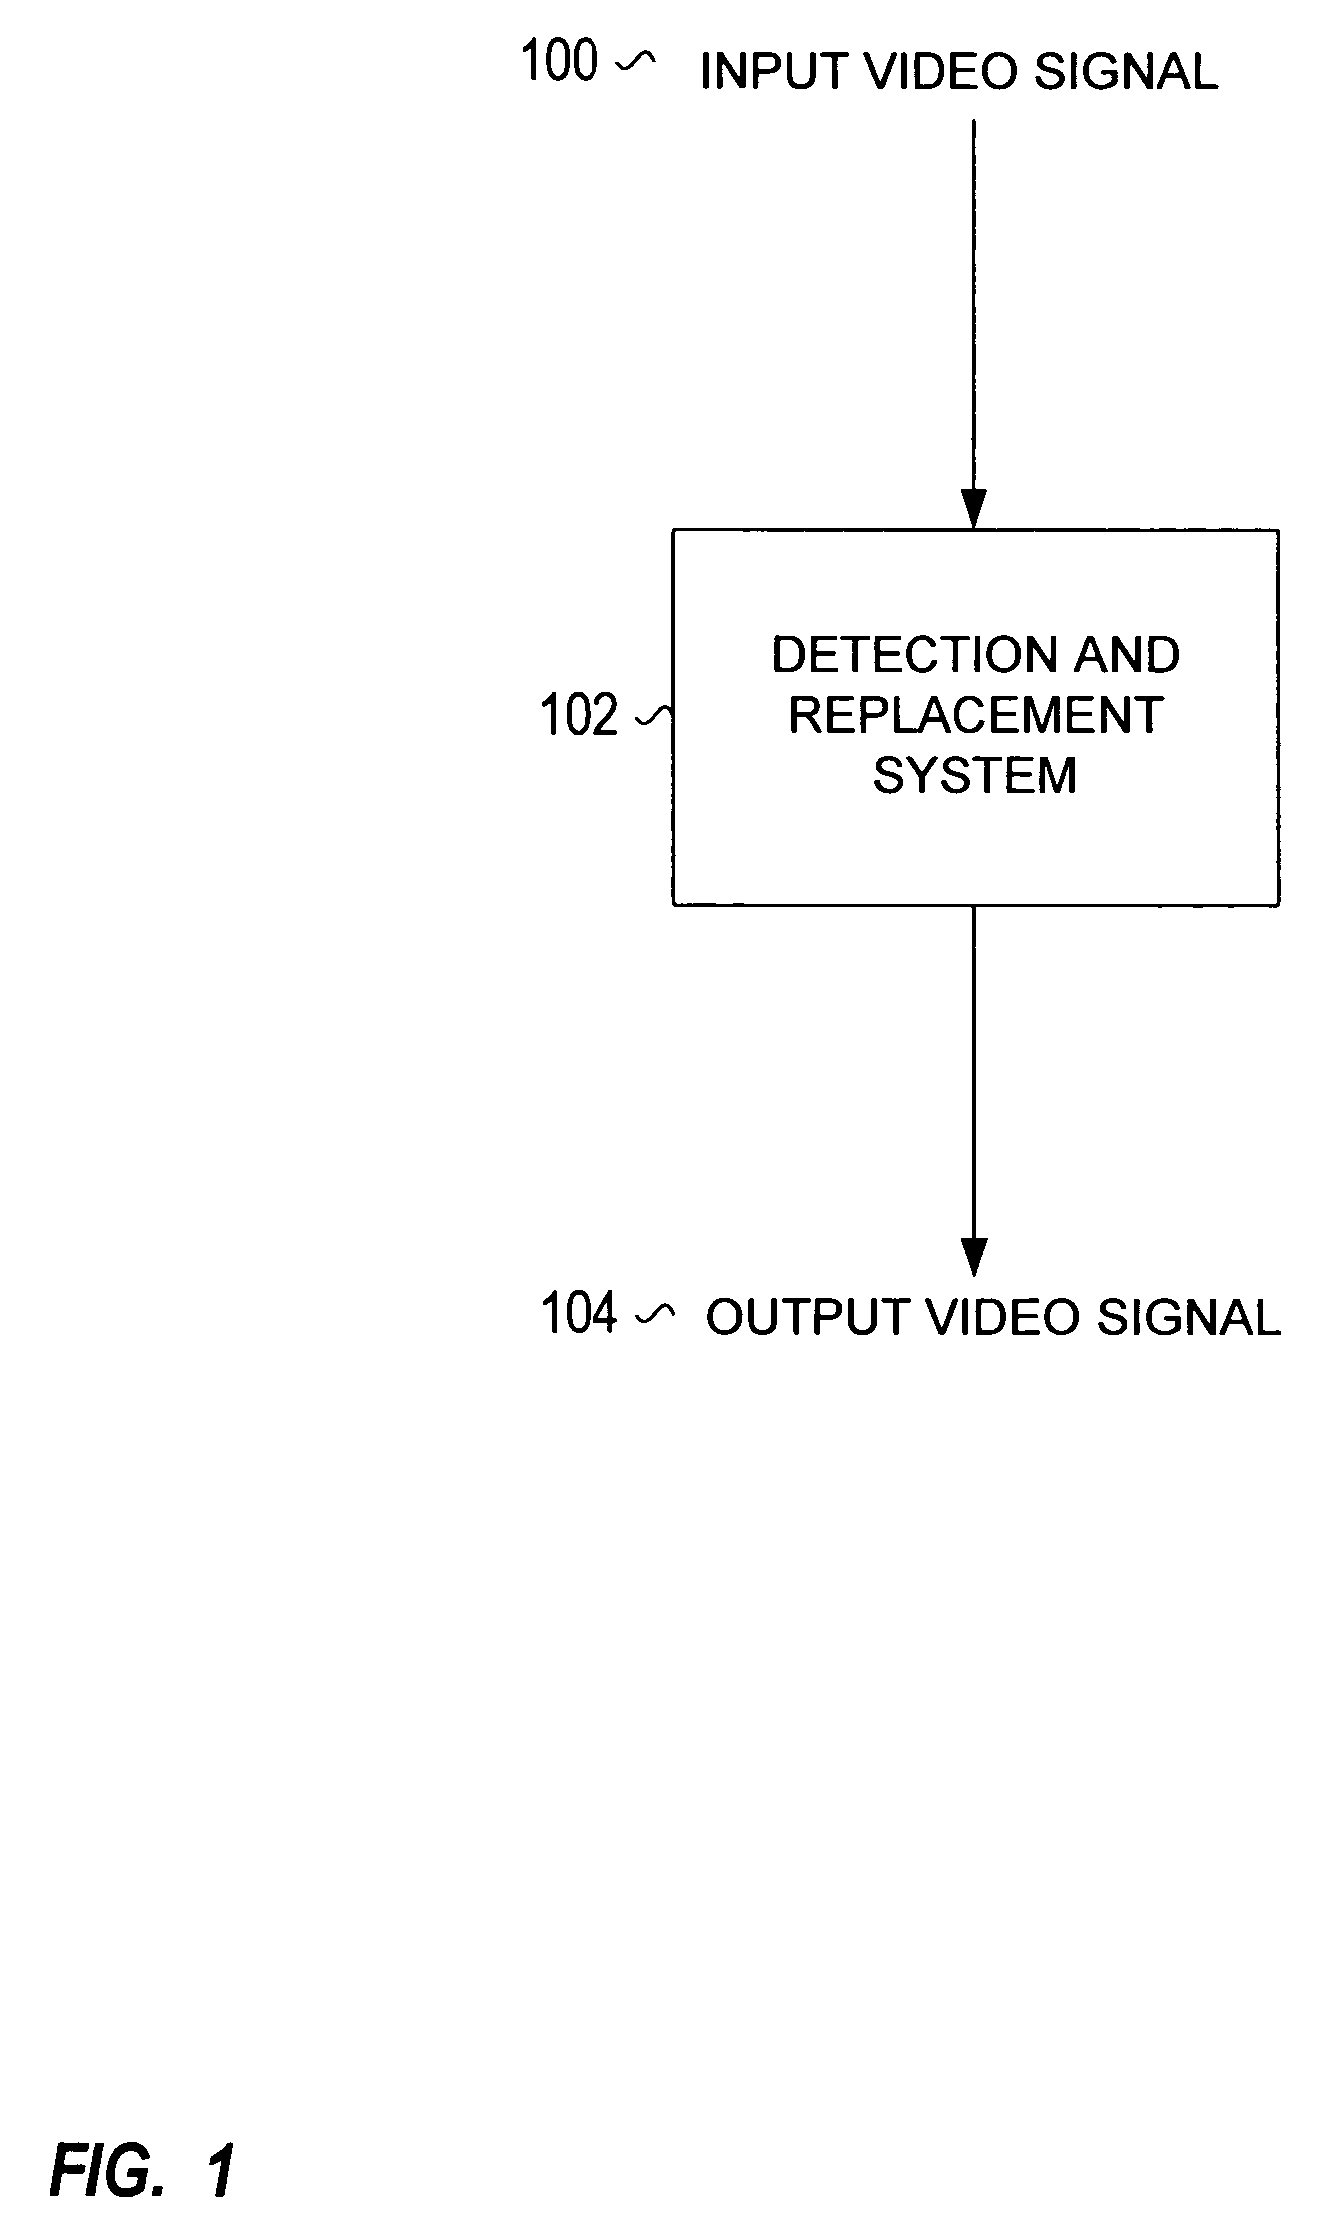 Video detection and insertion